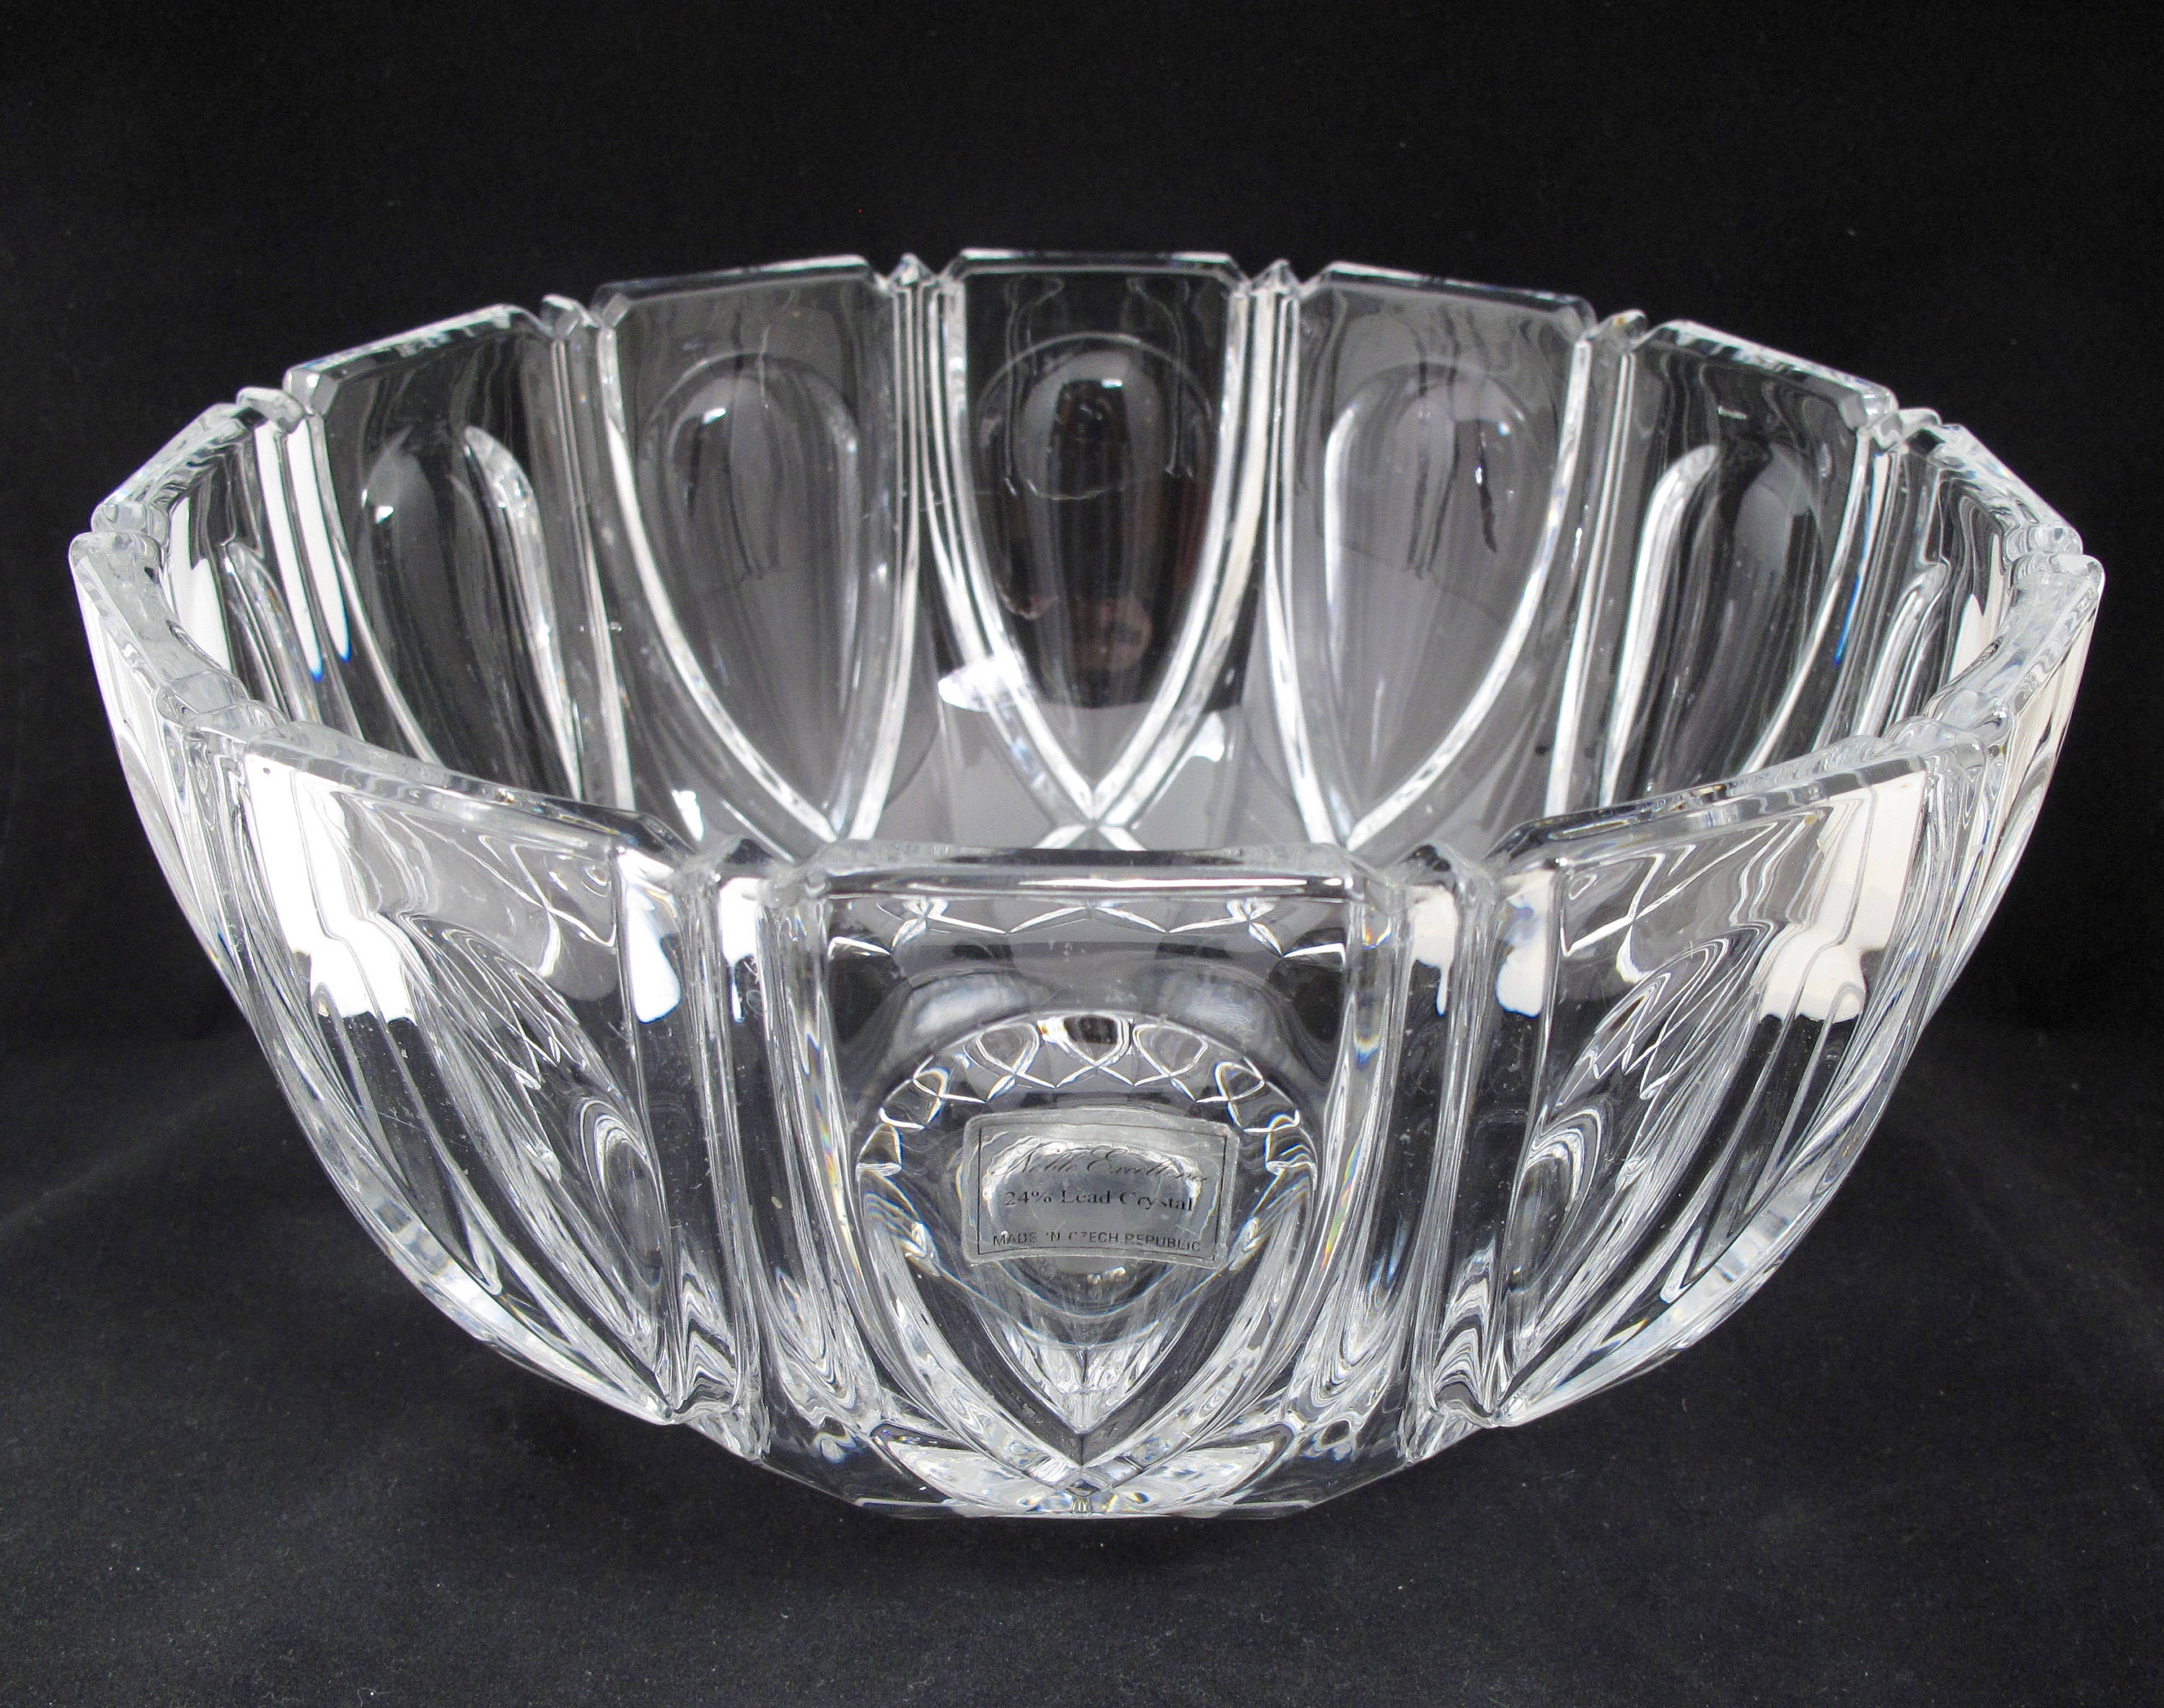 30 Famous Mikasa Vases and Bowls 2024 free download mikasa vases and bowls of noble excellence 24 lead crystal bowl made in czech republic intended for dc29fc294c28ezoom